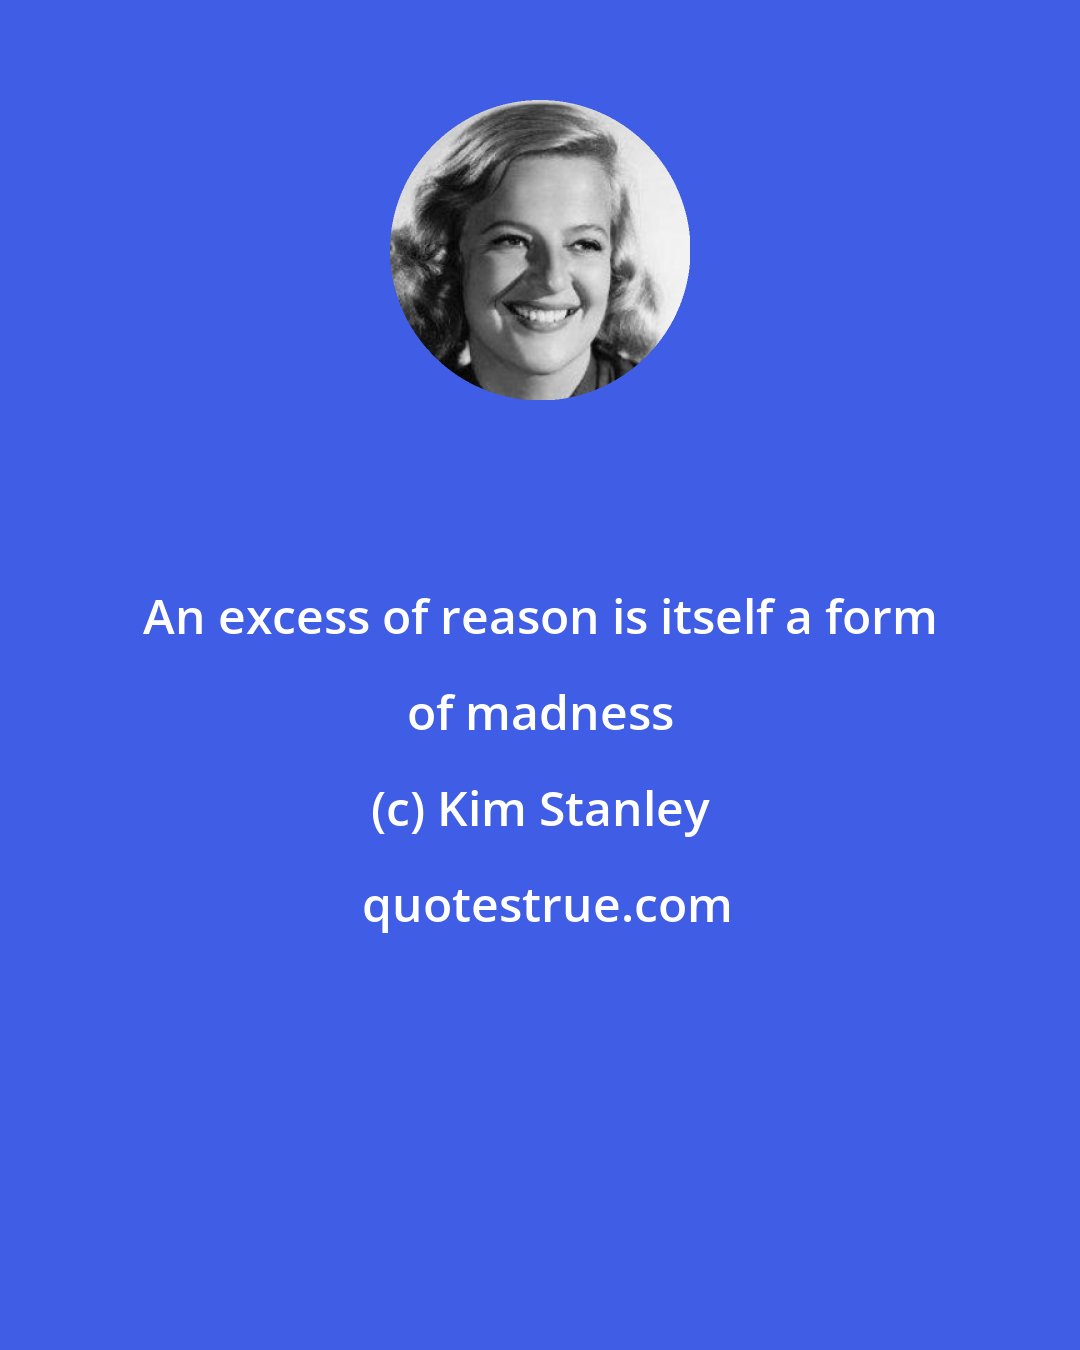 Kim Stanley: An excess of reason is itself a form of madness